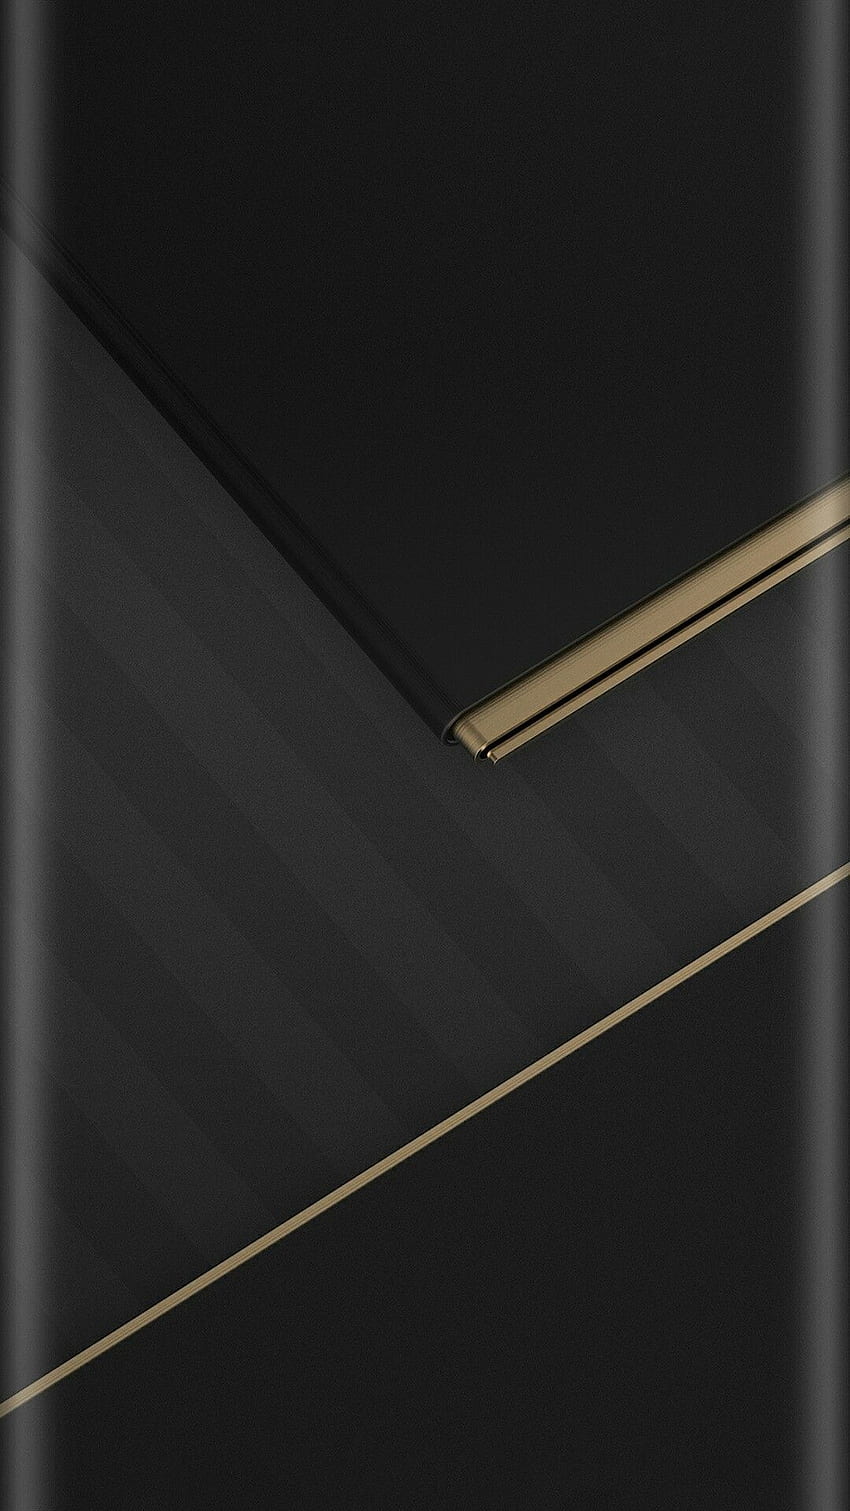 Grey Stripes Black and Gold . *Abstract HD phone wallpaper